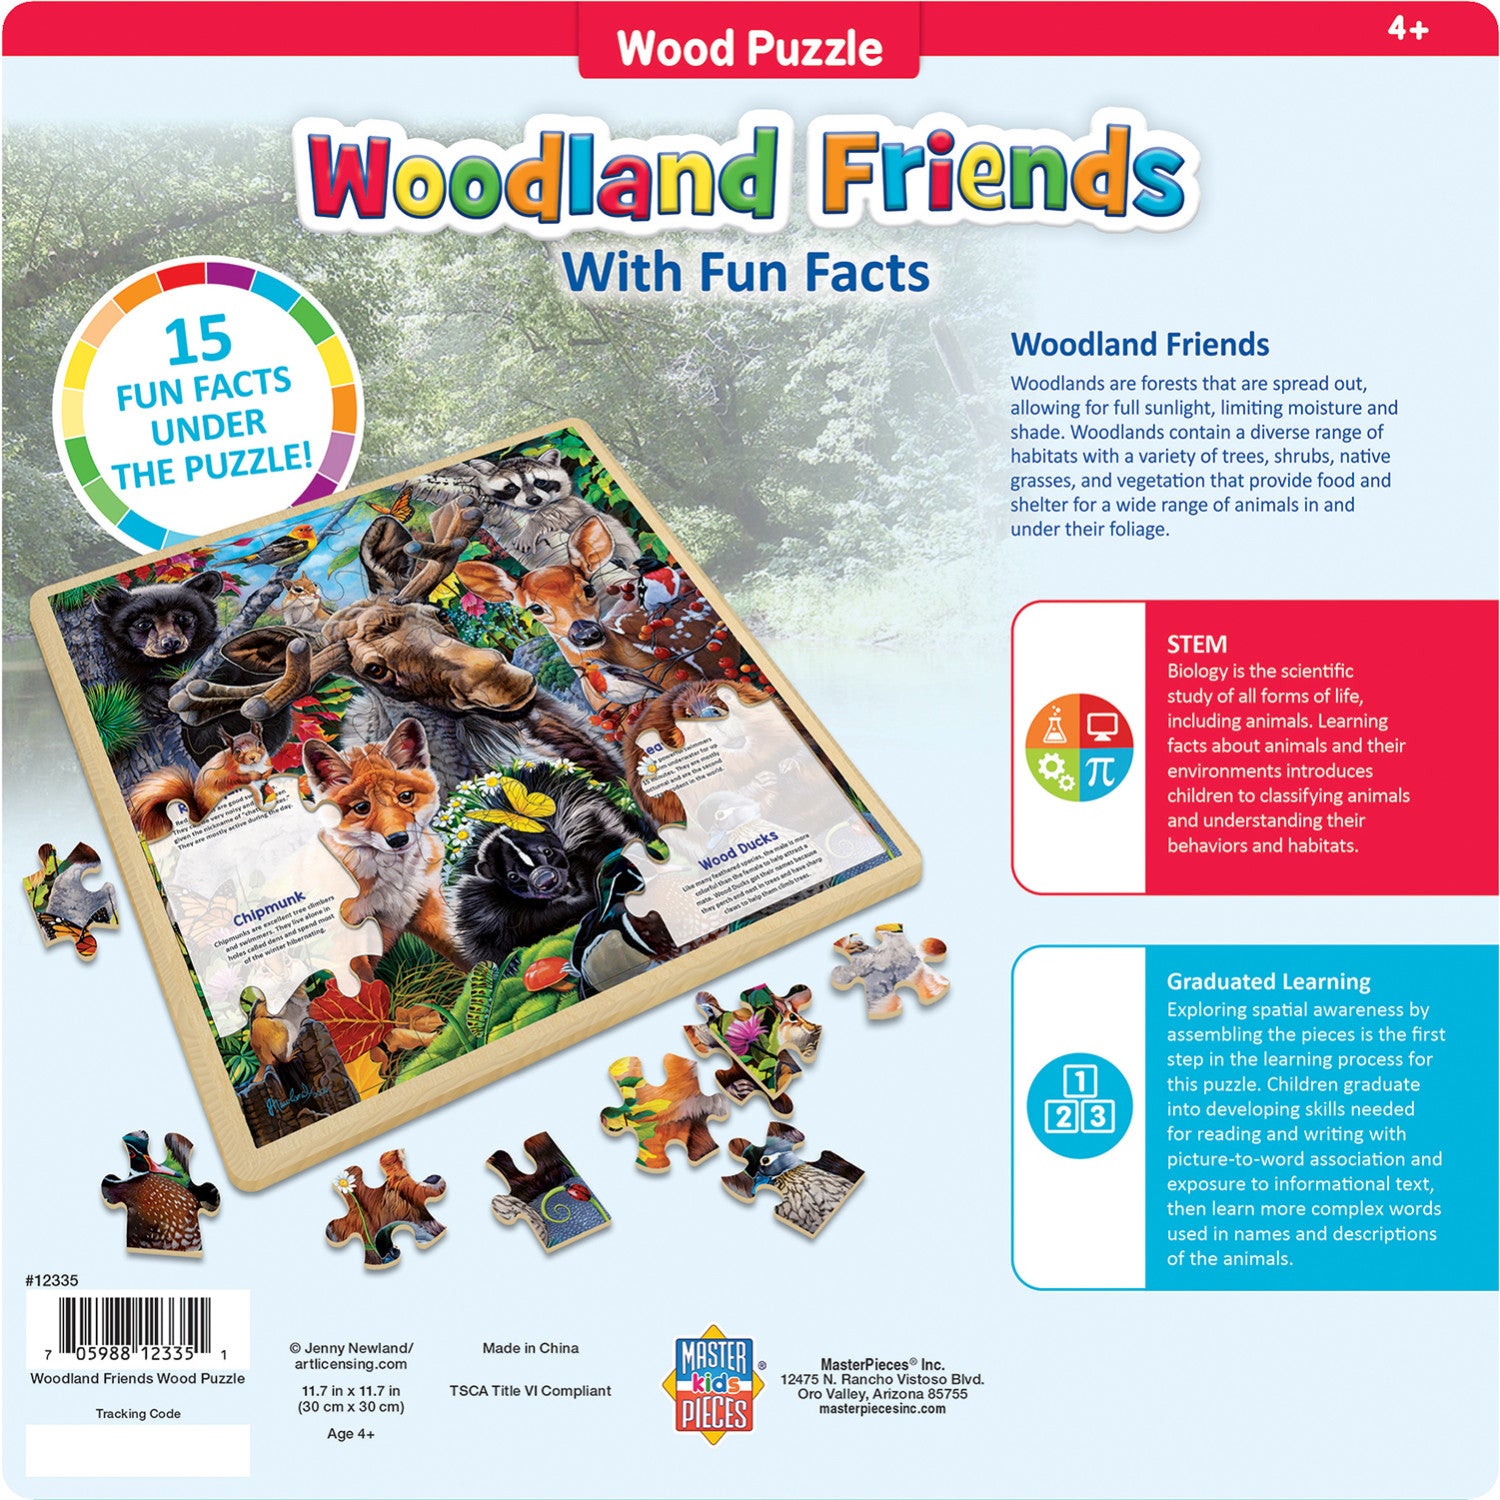 Wood Fun Facts - Woodland Friends 48 Piece Wood Jigsaw Puzzle